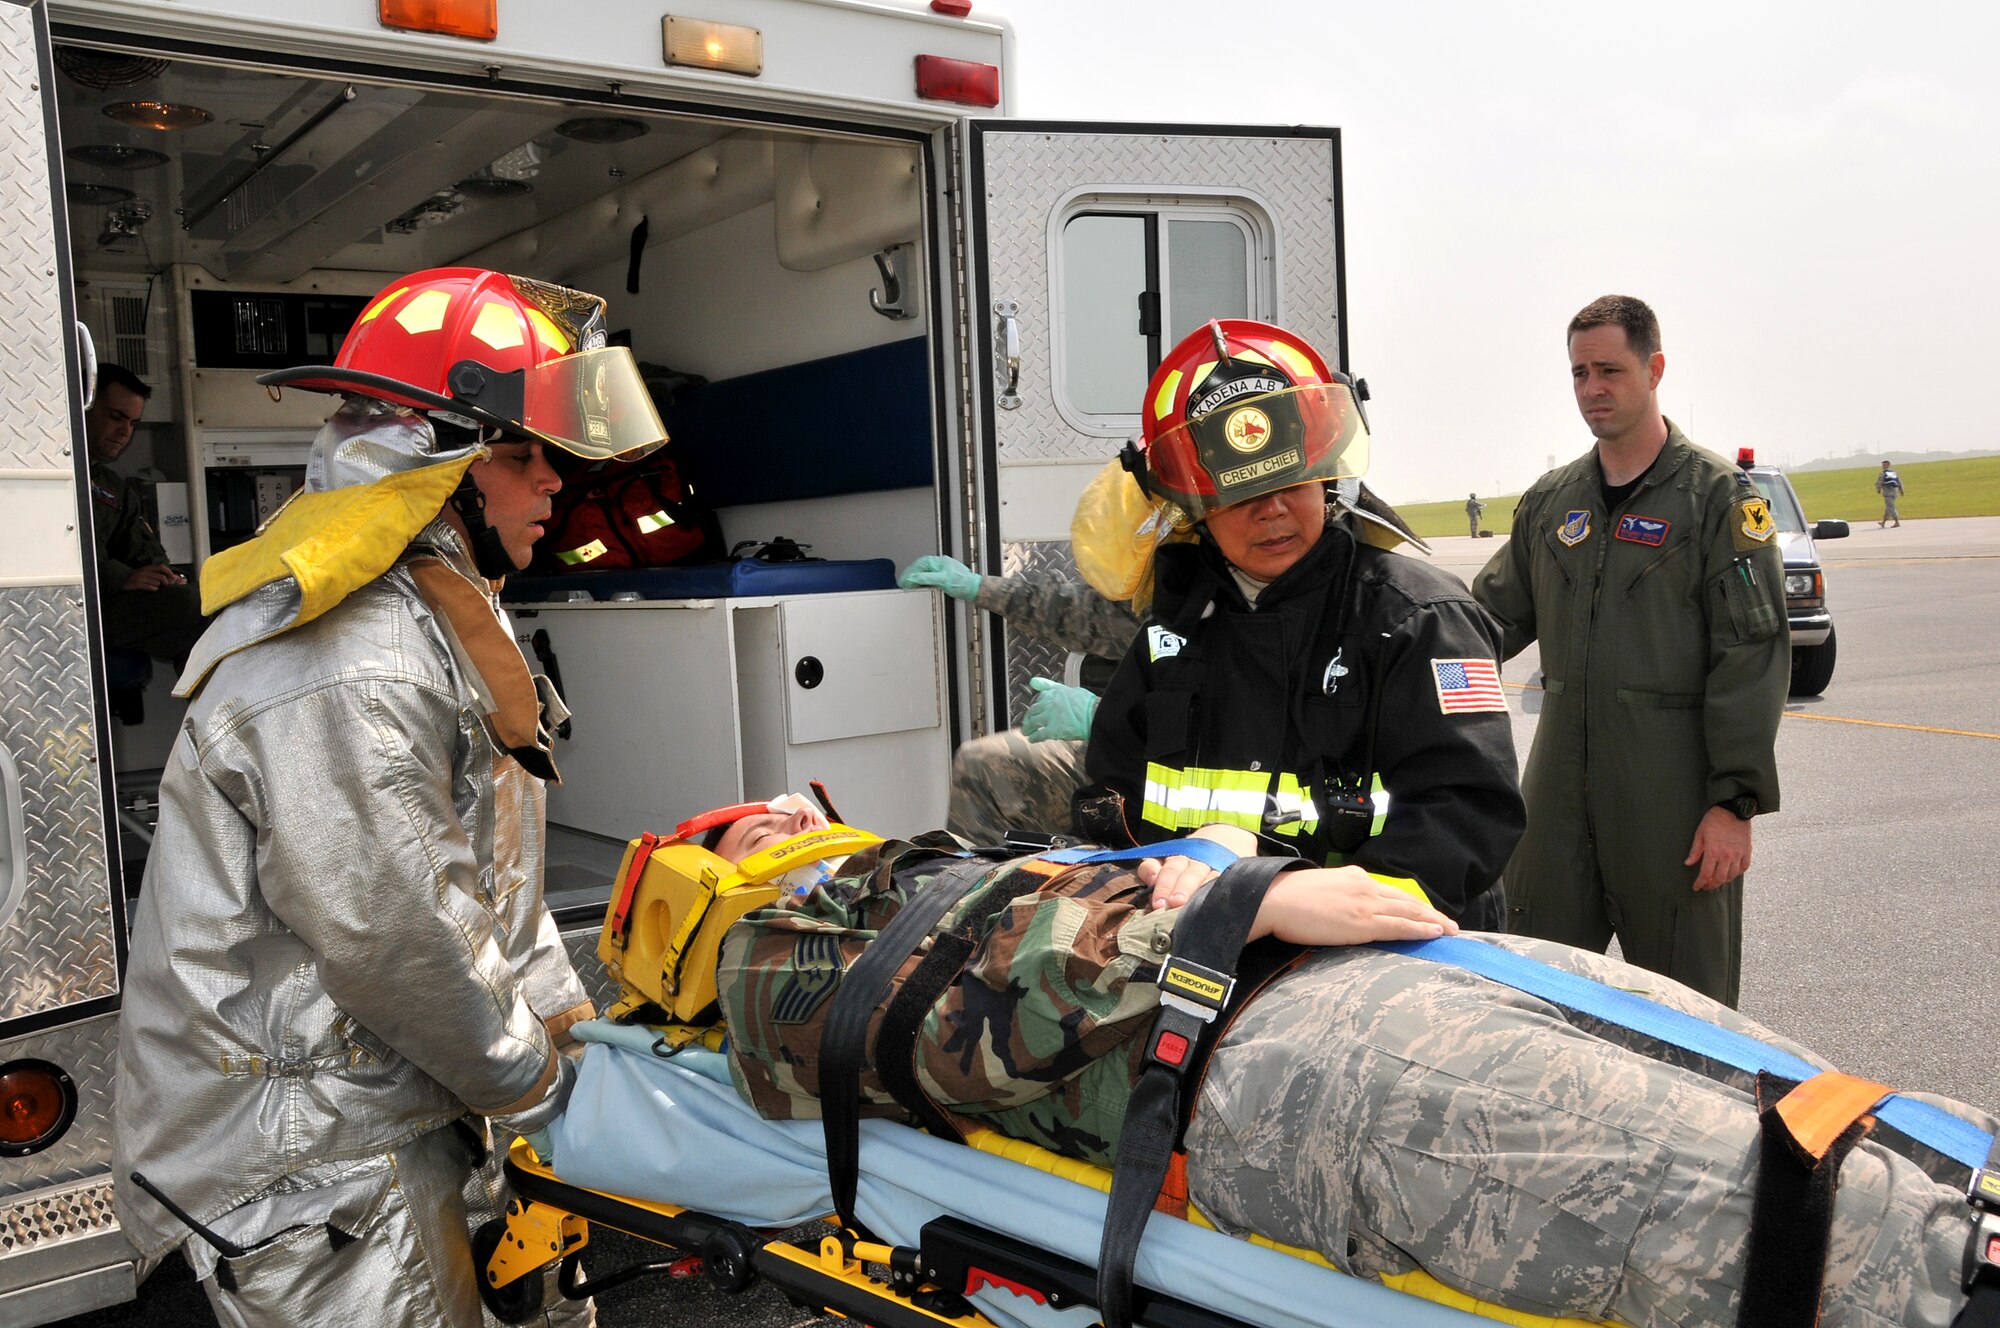 Members from the Kadena Fire Department transport a victim to medical personnel for treatment in a simulation involving an Airborne Warning and Control System E-3 Sentry engine fire during Beverly High 10-02 at Kadena Air Base, Japan, March 23.  The 18th Wing is participating in a Local Operational Readiness Exercise March 22-26 to test the readiness of Kadena Airmen. (U.S. Air Force photo/Tech. Sgt. Angelique Perez)       